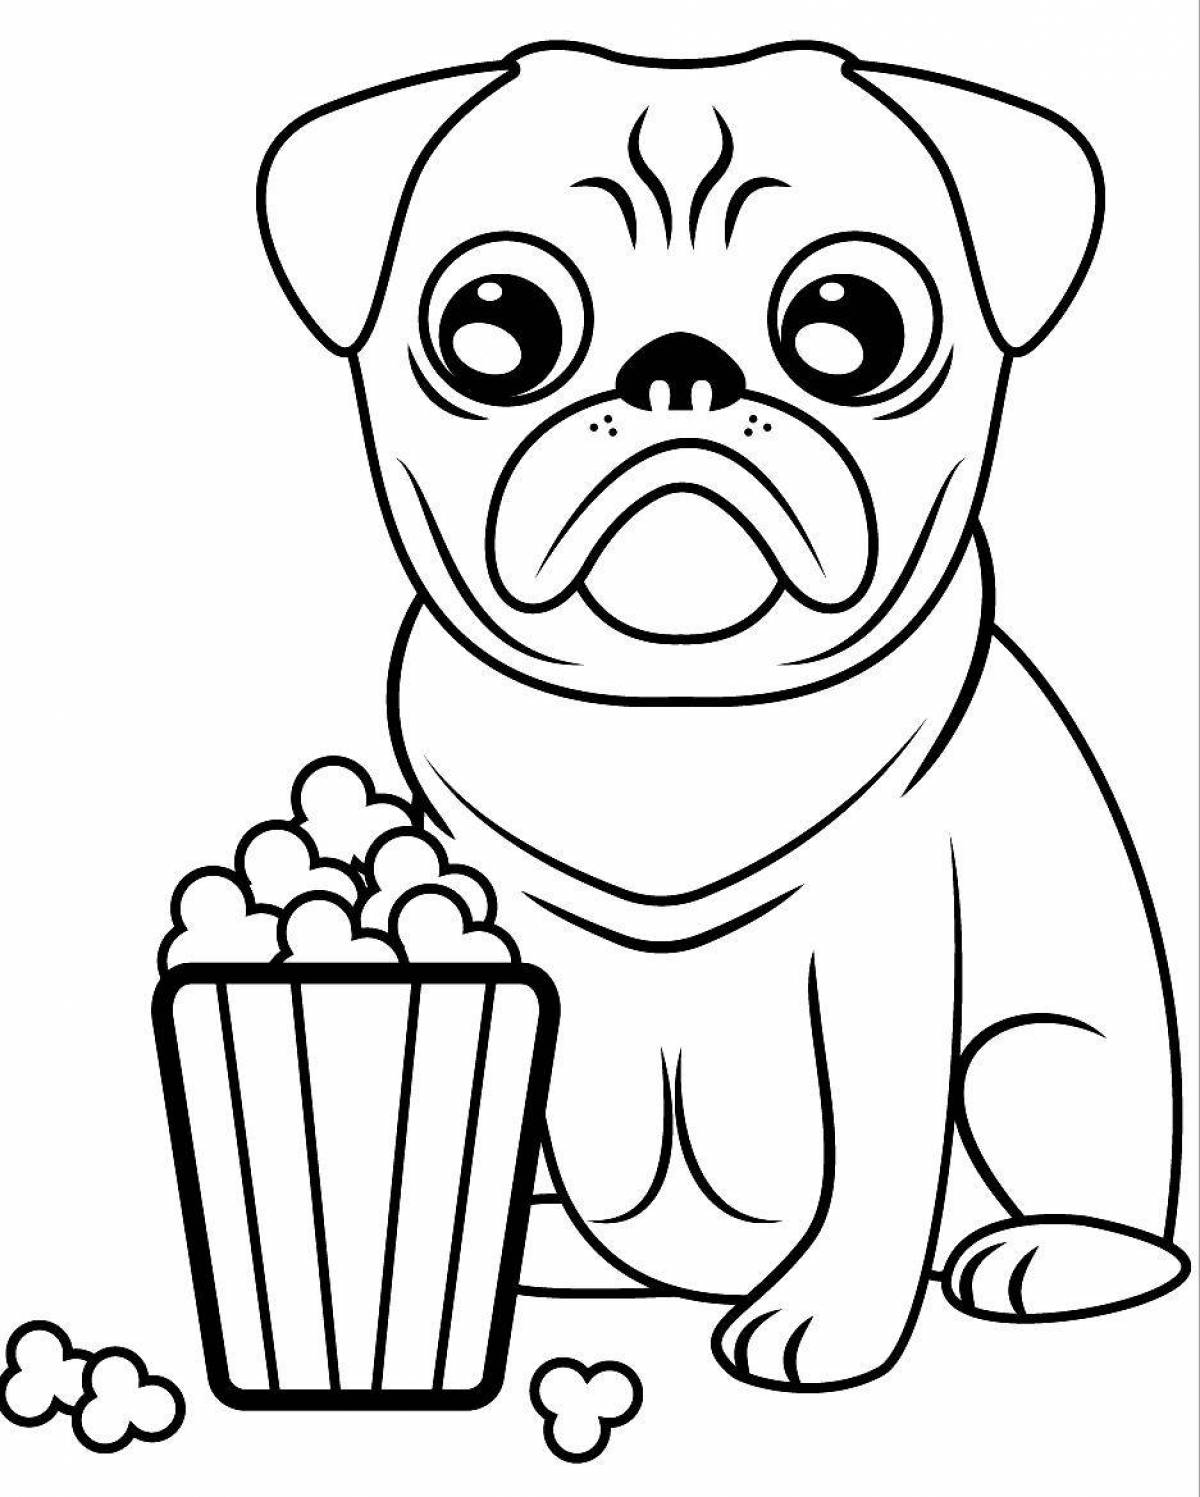 Coloring page funny pug for the new year